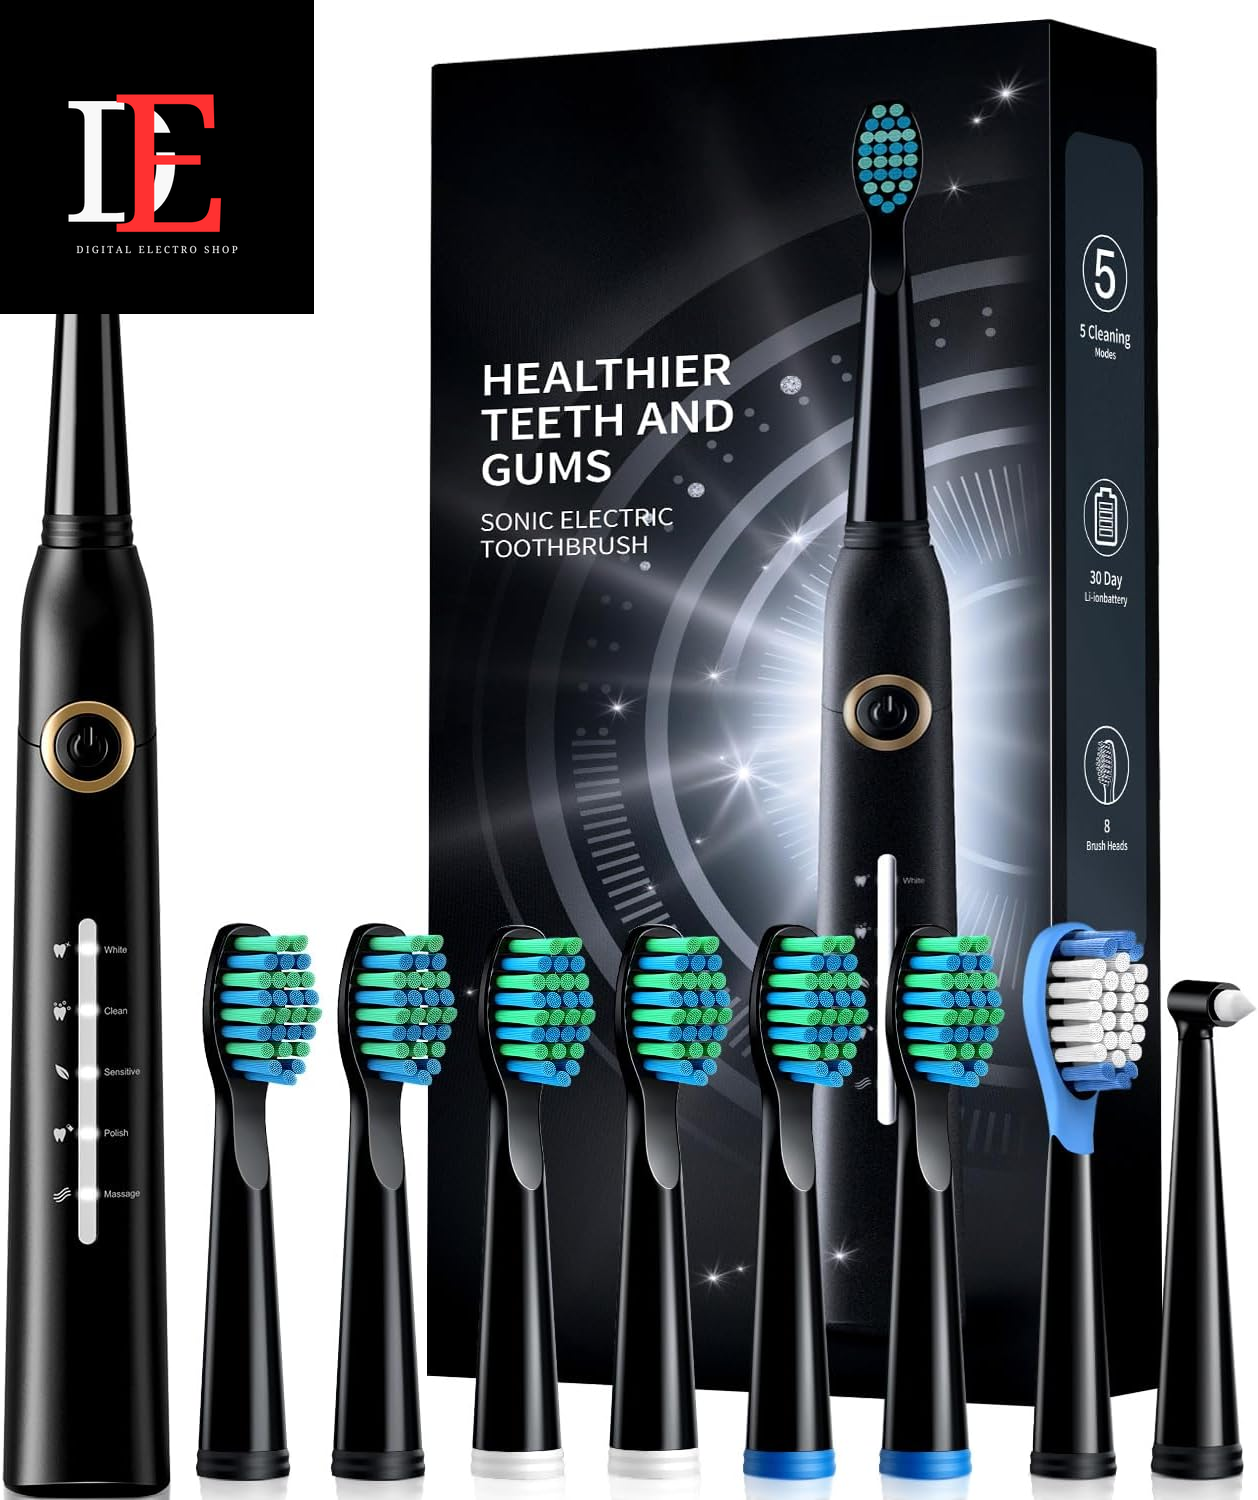 Best Electric Toothbrush for Adults with 8 Brush Heads, 40000 VPM Deep Clean, 5 Modes, Rechargeable - Fast Charge, Lasts 30 Days"